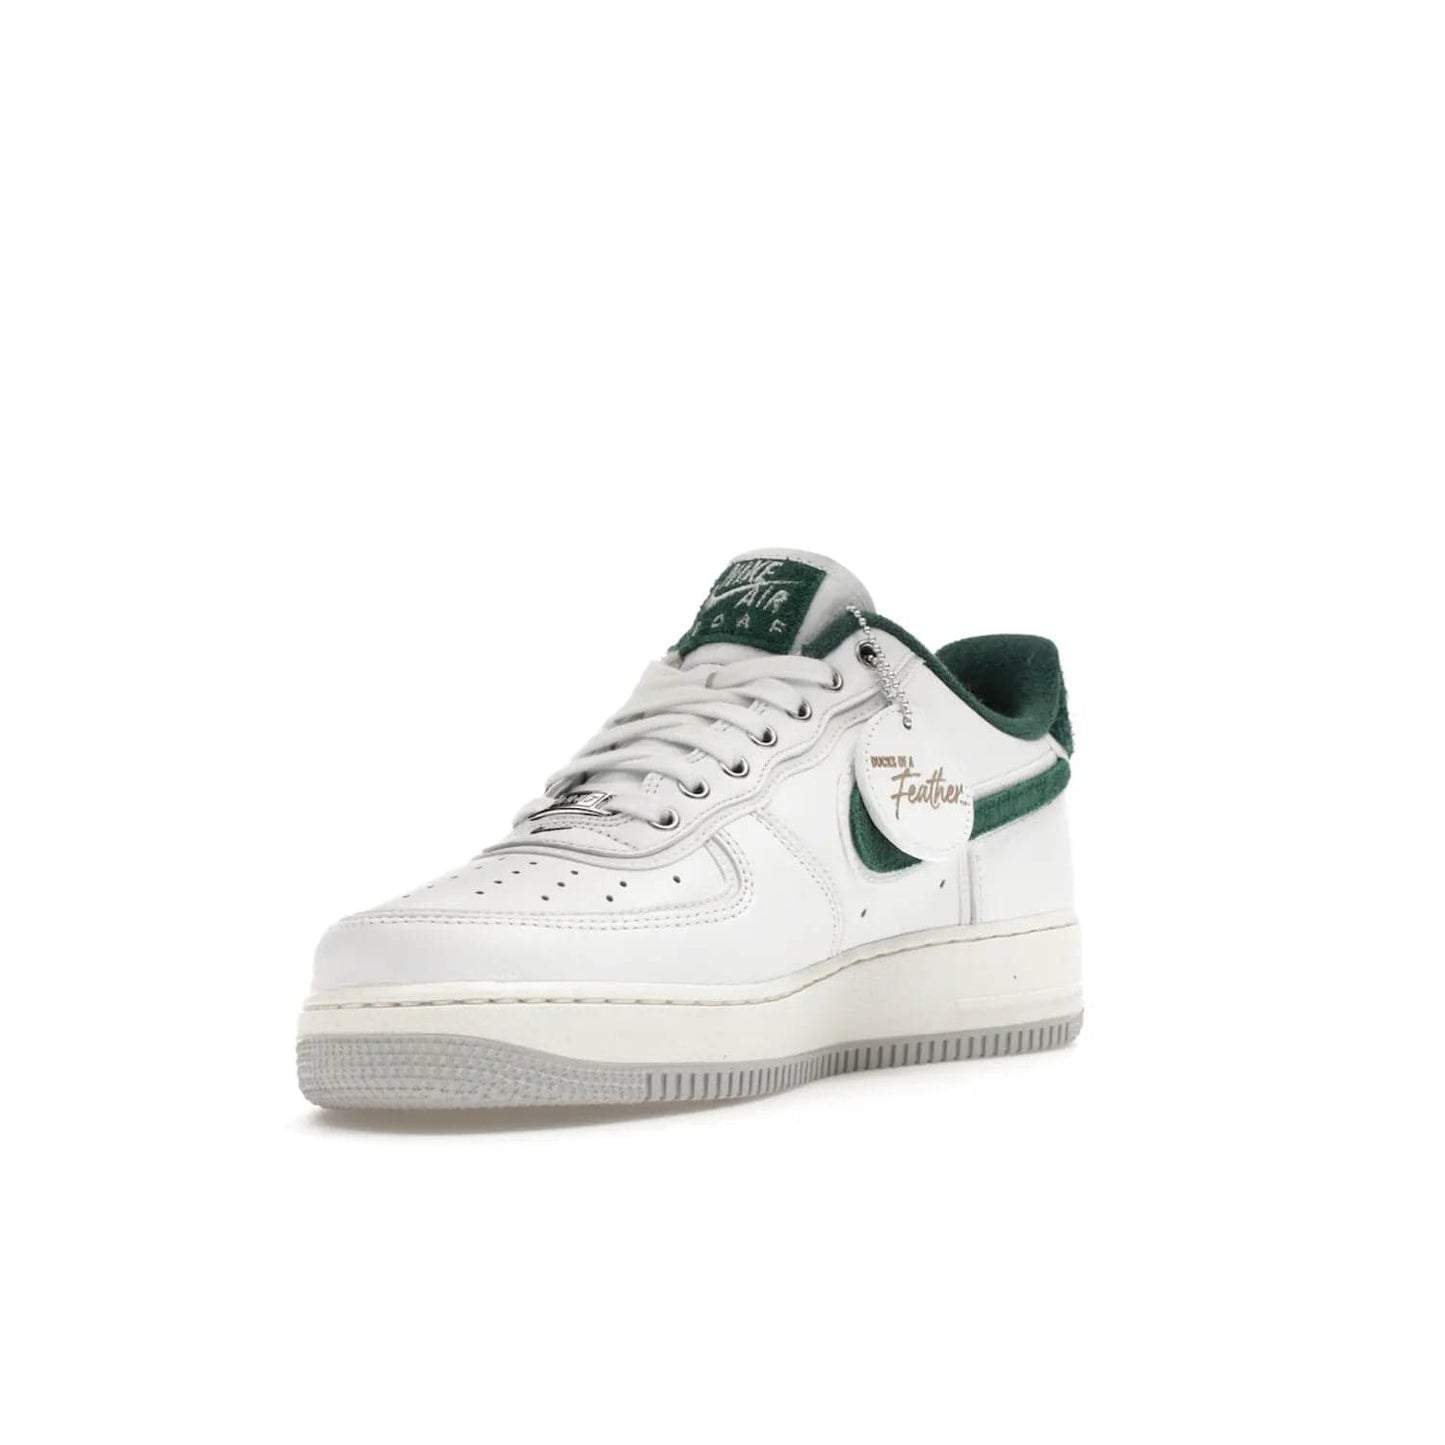 Nike Air Force 1 Low '07 Premium University of Oregon PE - Image 14 - Only at www.BallersClubKickz.com - The Nike Air Force 1 Low '07 Premium. Special Oregon University colorway. White base with green and sail accents. Cushioned rubber midsole. Comfort and style. Support your school!